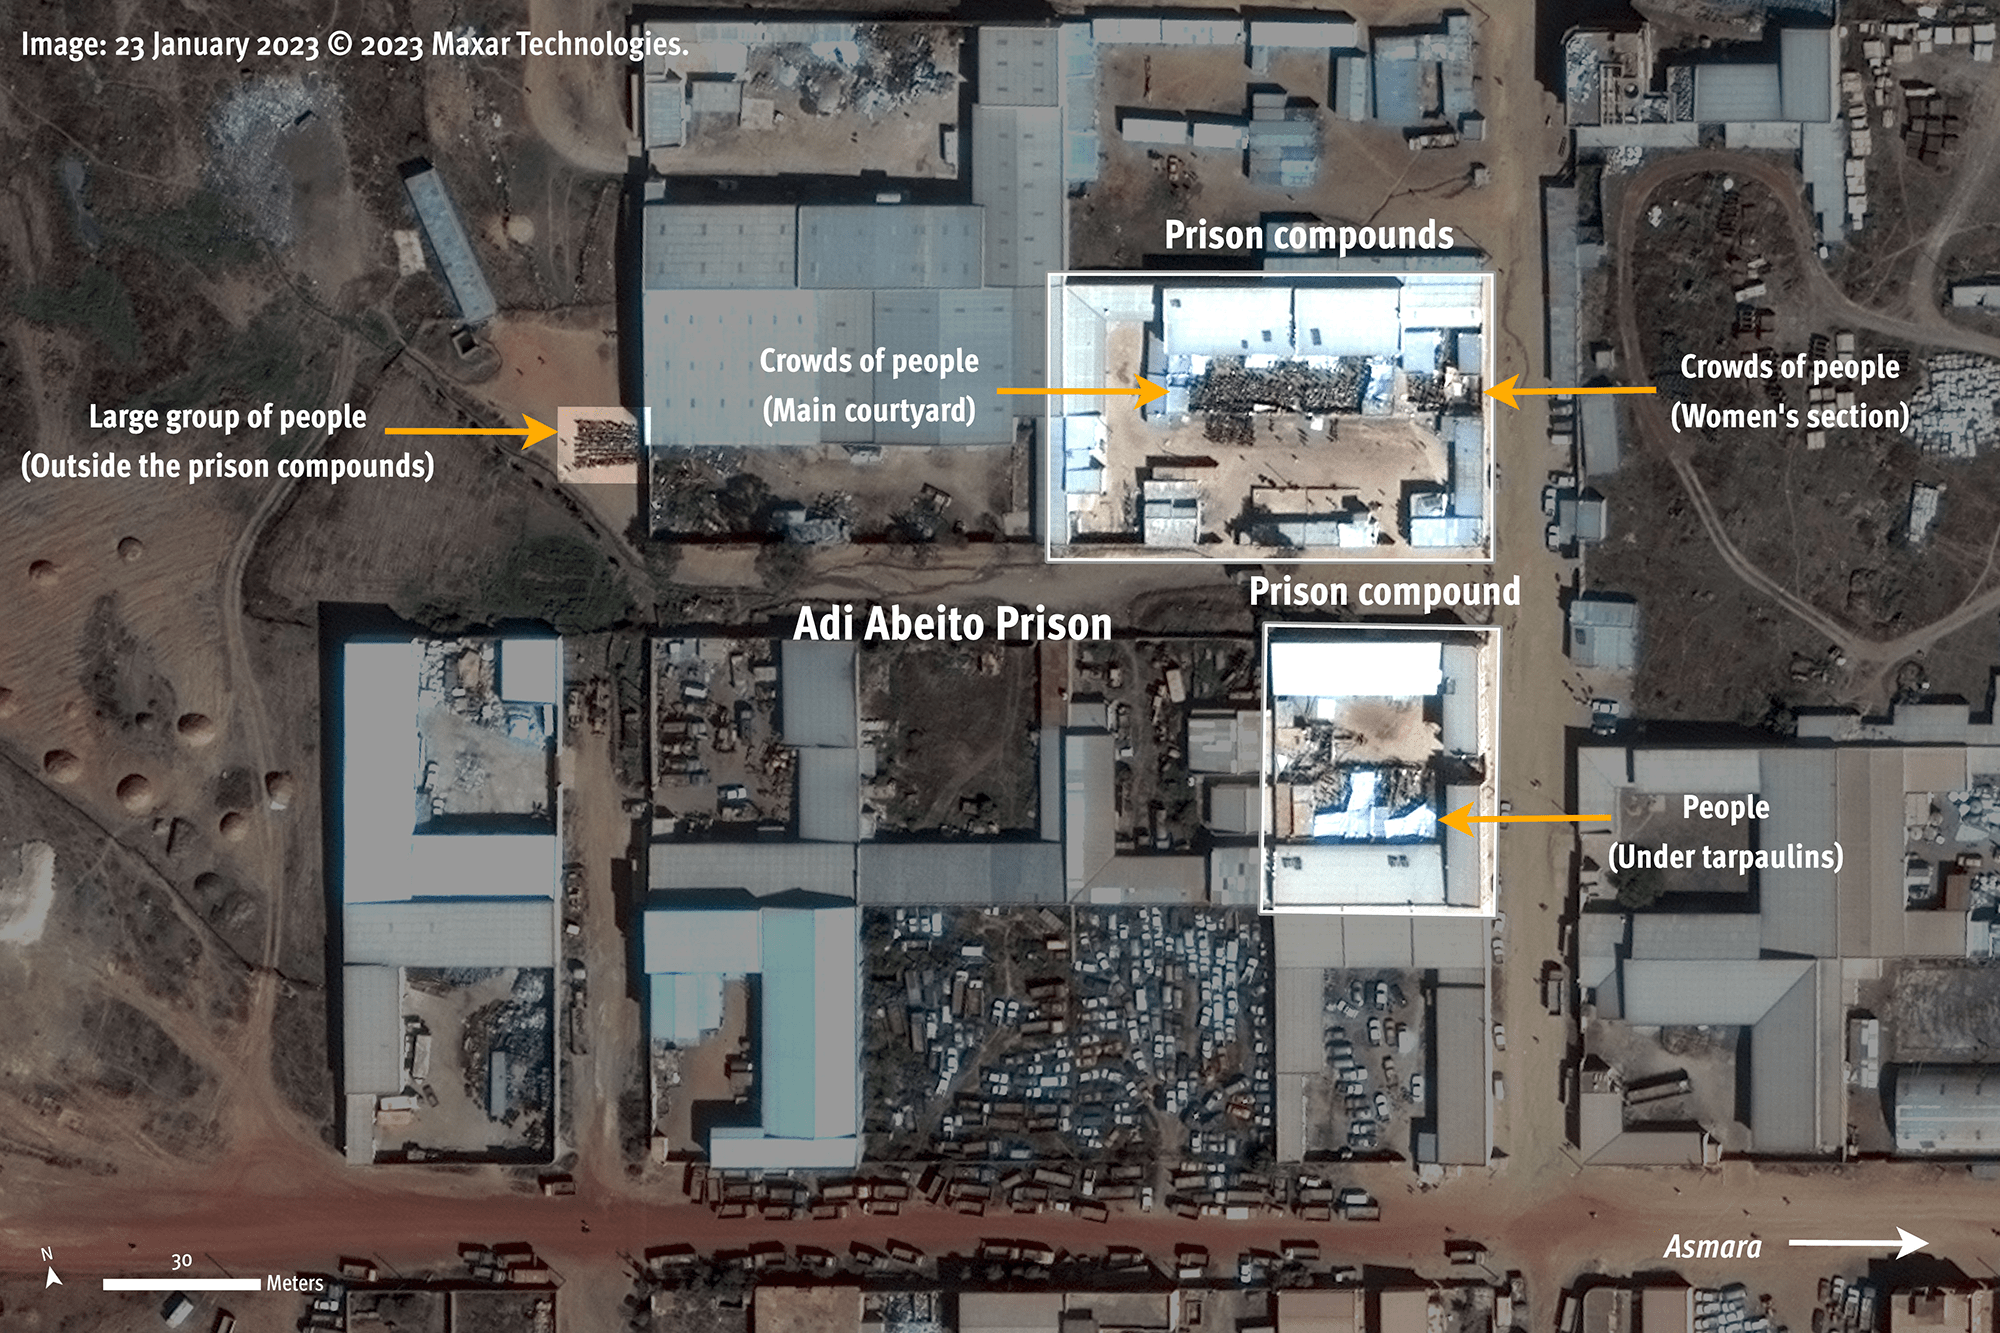 Satellite image recorded on January 23, 2023 offers a snapshot of the large crowds of people gathered in the compounds of Adi Abeito prison, located north of the capital of Asmara.